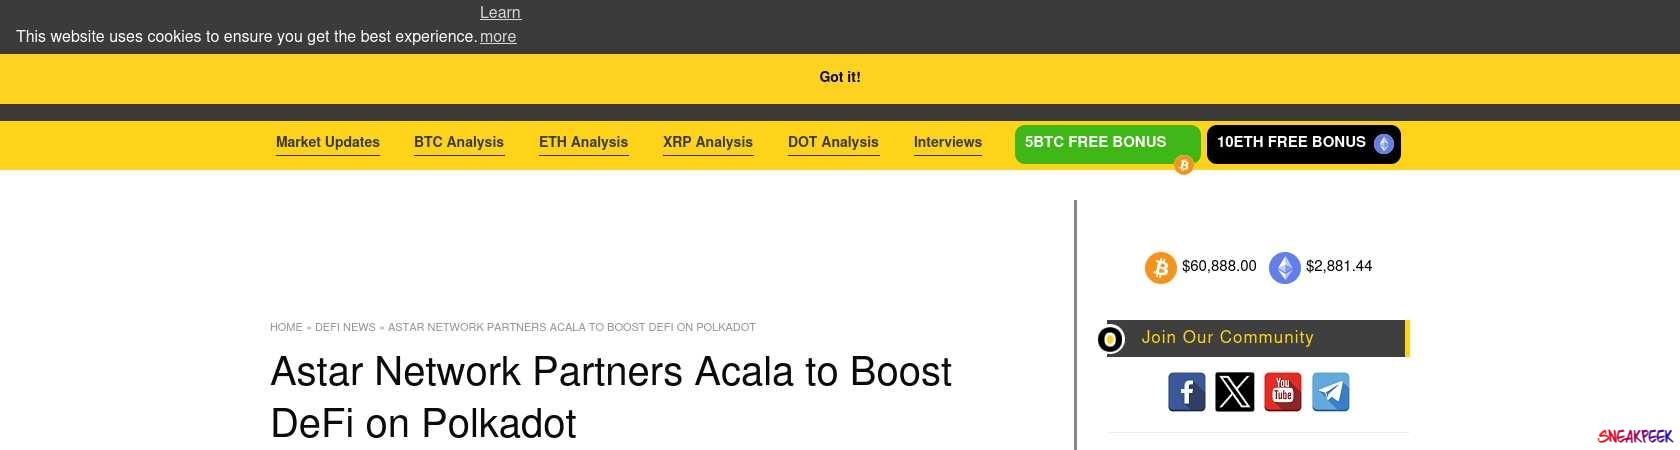 Read the full Article:  ⭲ Astar Network Partners Acala to Boost DeFi on Polkadot